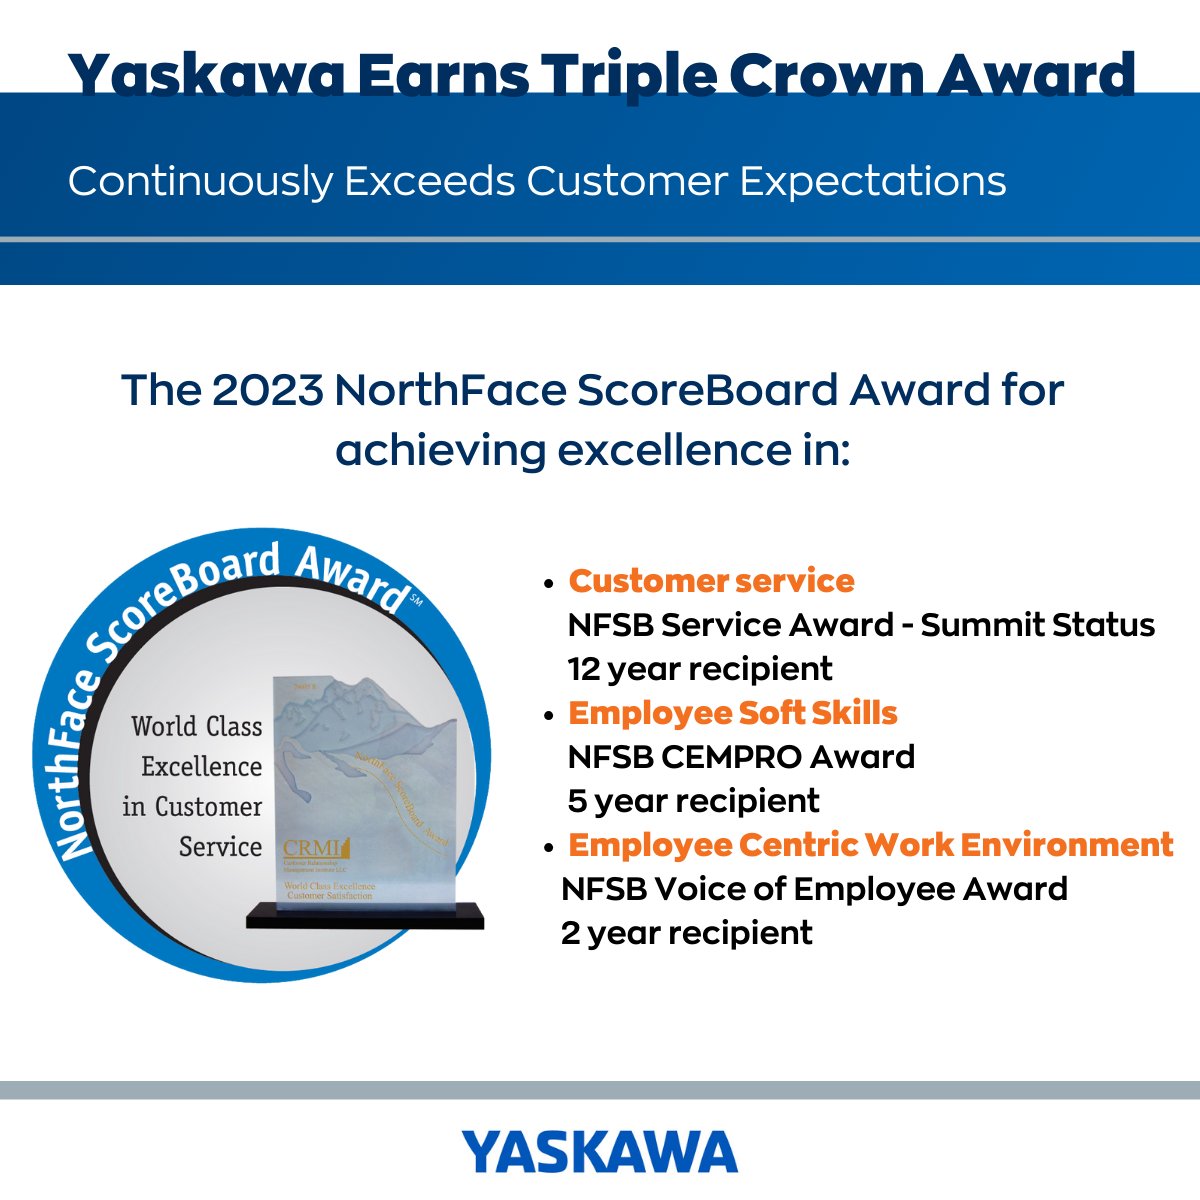 Yaskawa America, Inc. is honored to receive the prestigious 2023 @CRMIcx NorthFace ScoreBoard Triple Crown Award (NFSB) for achieving excellence in customer service and support. go.yaskawa-america.com/p2qf4z06 #Yaskawa #WeAreYaskawa #YaskawaQuality #customerservice